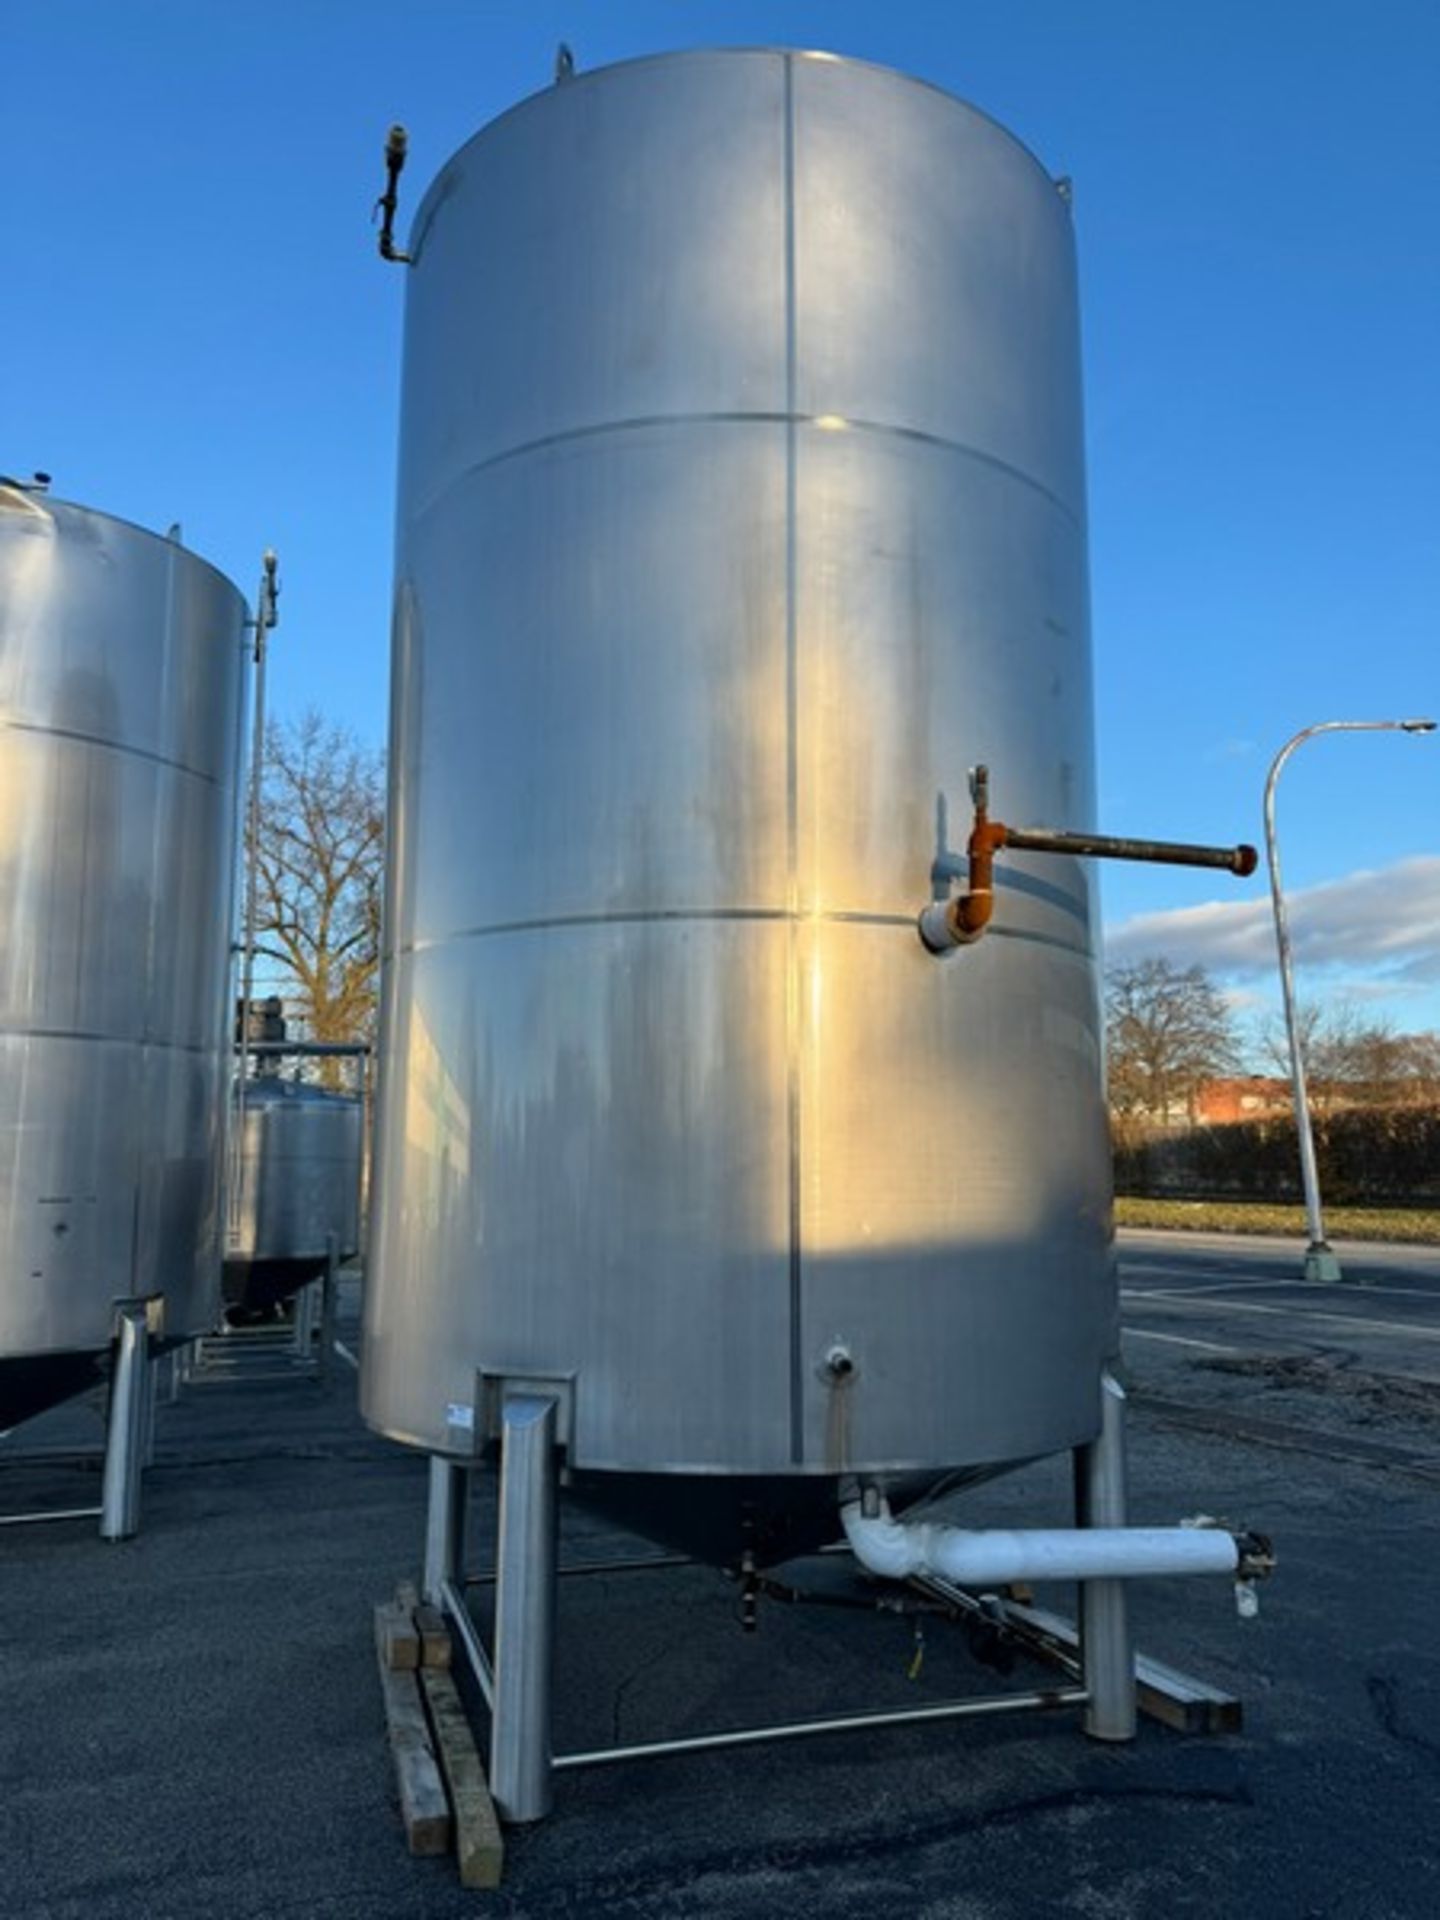 2012 Specific Mechanical Systems 200 BBL Capacity S/S Cold Liquor Tank, S/N RMP-136-12-300, with S/S - Image 2 of 10